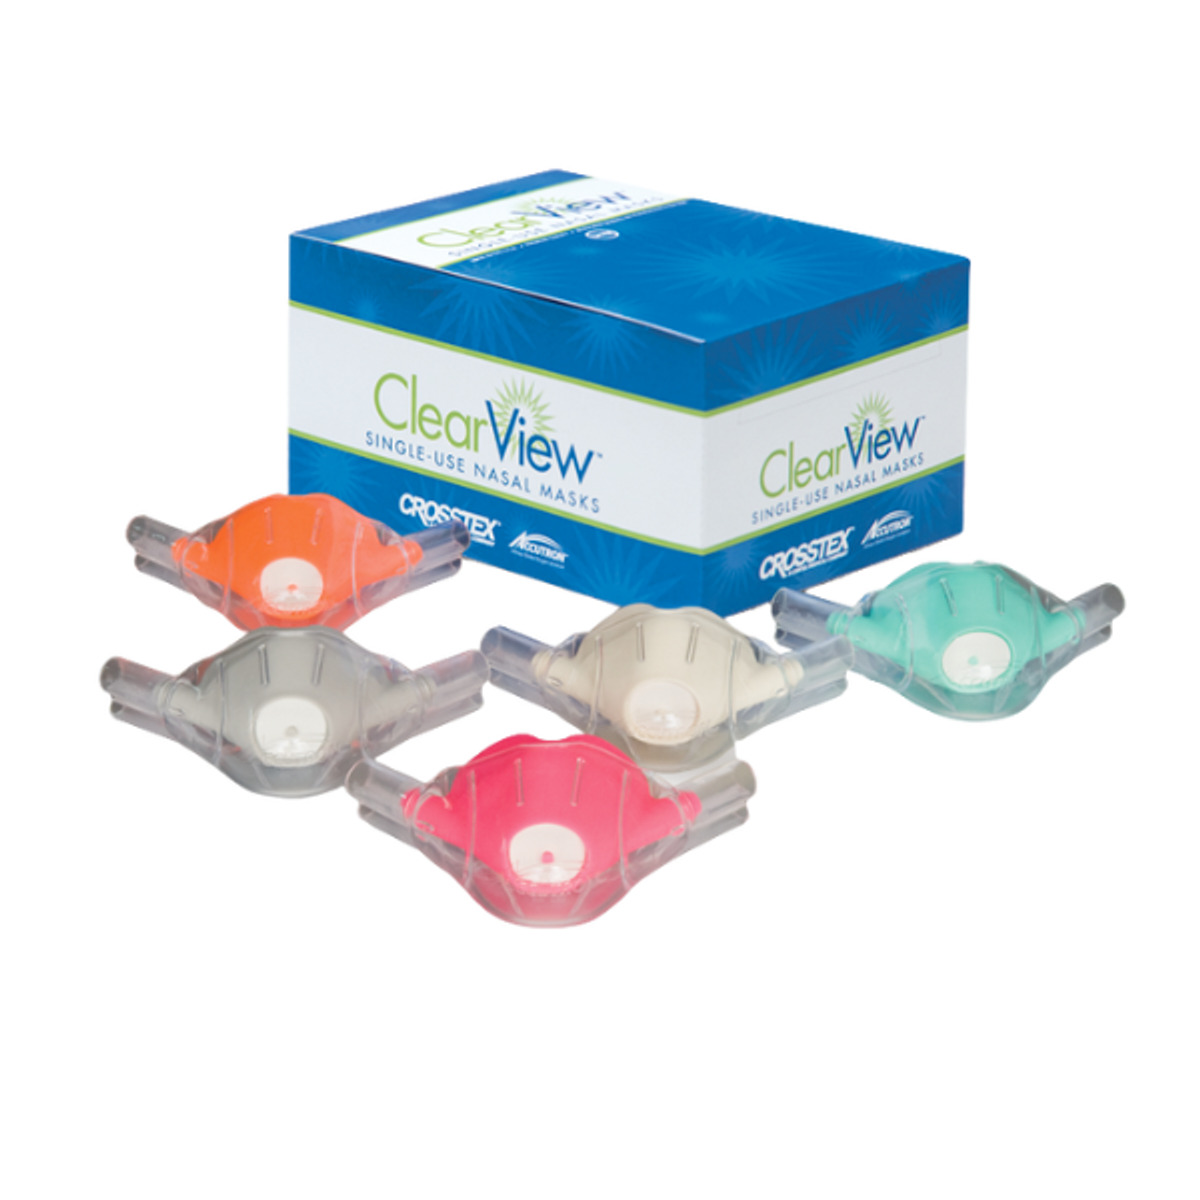 Crosstex Accutron Clearview Classic Nasal Masks